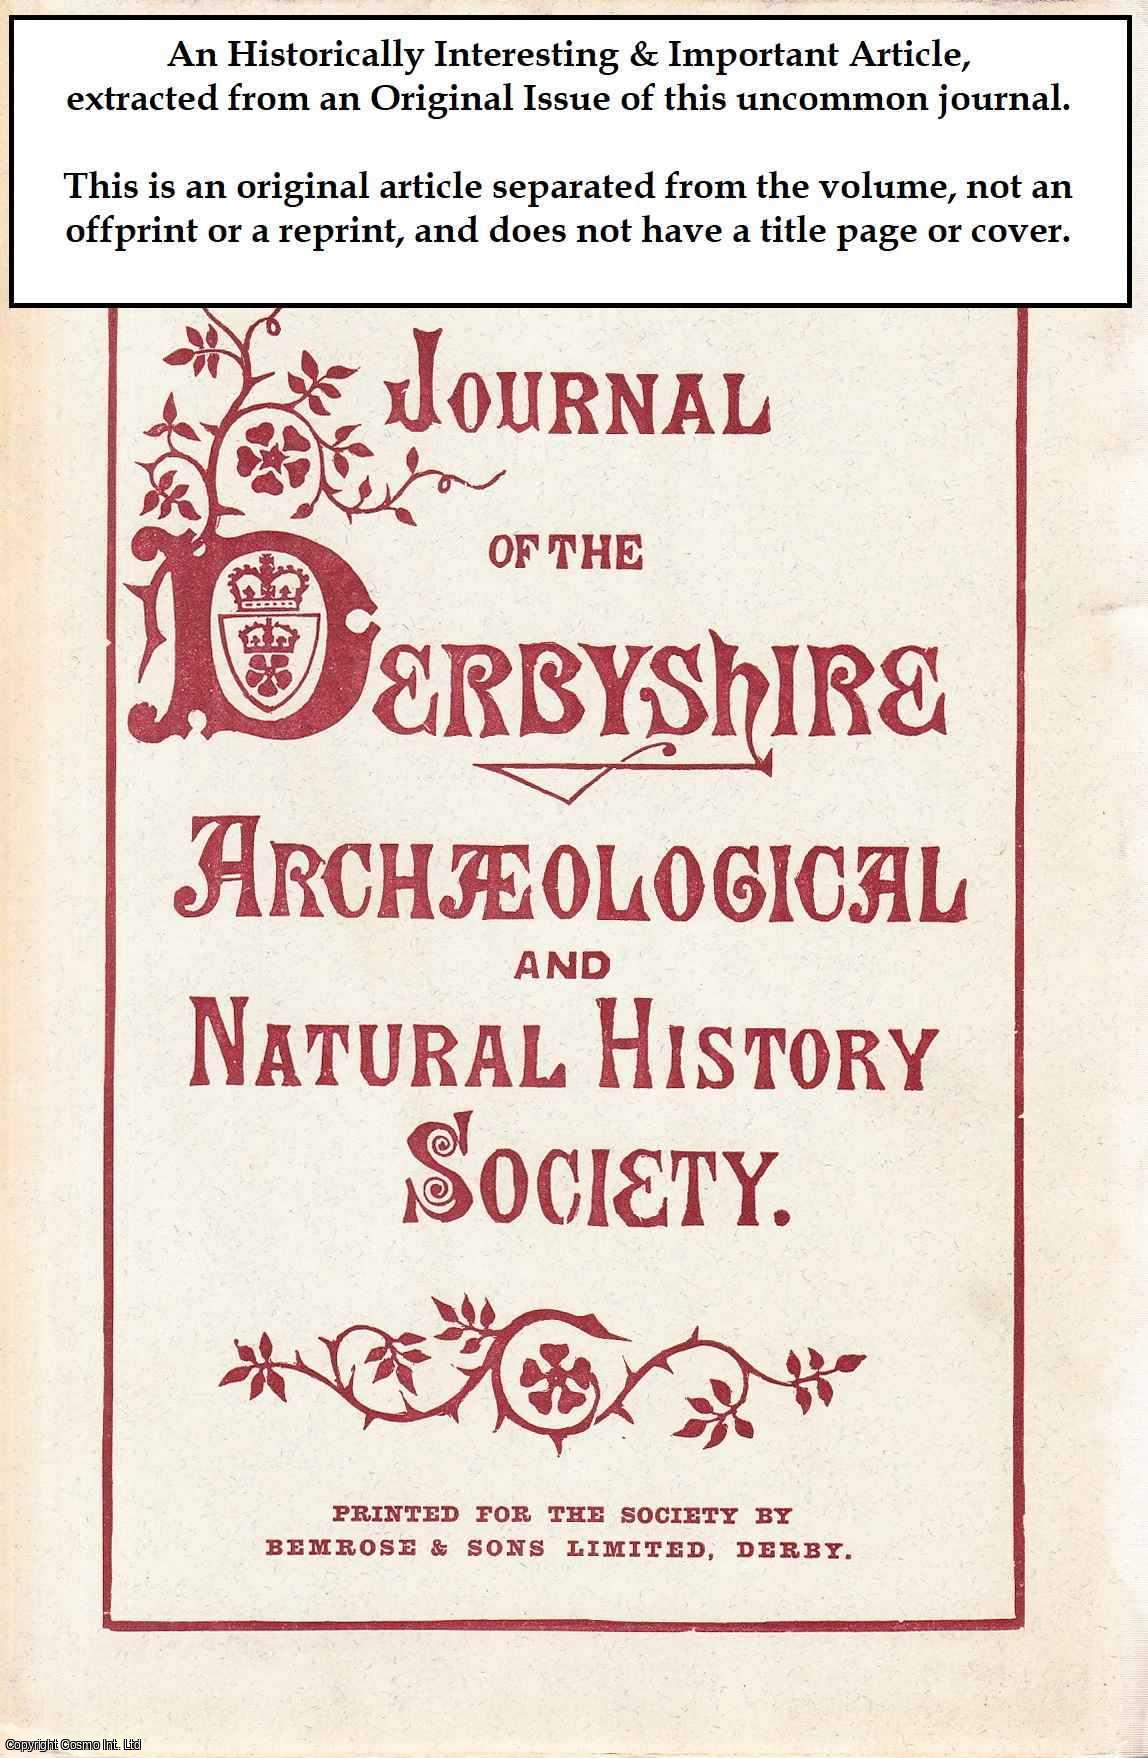 J. Charles Cox - The Tutbury Horn. An original article from the Journal of the Derbyshire Archaeological & Natural History Society, 1886.